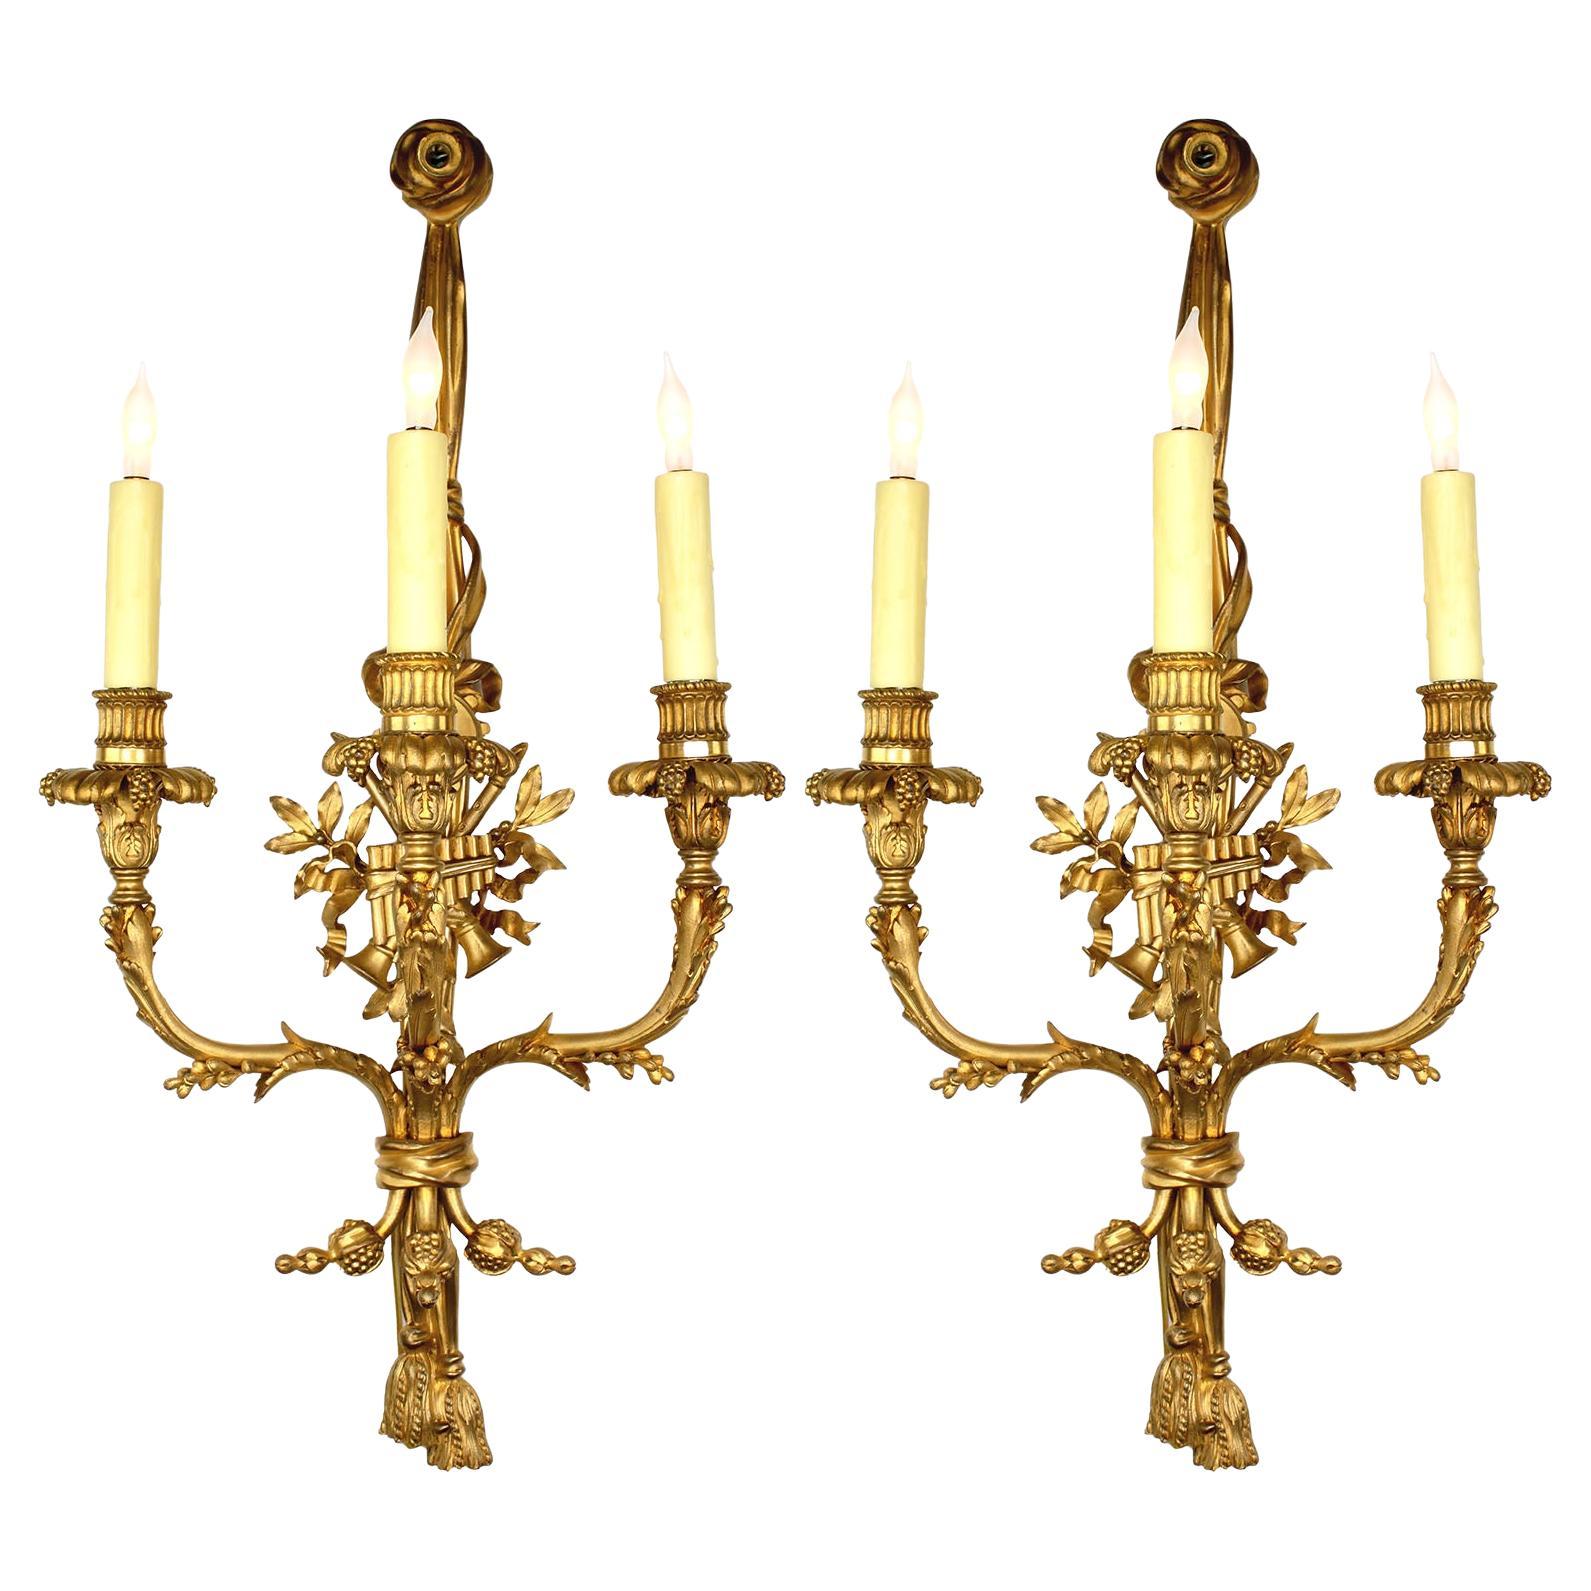 Pair of French 19th Century Louis XV Style Three-Light Gilt-Bronze Wall Sconces